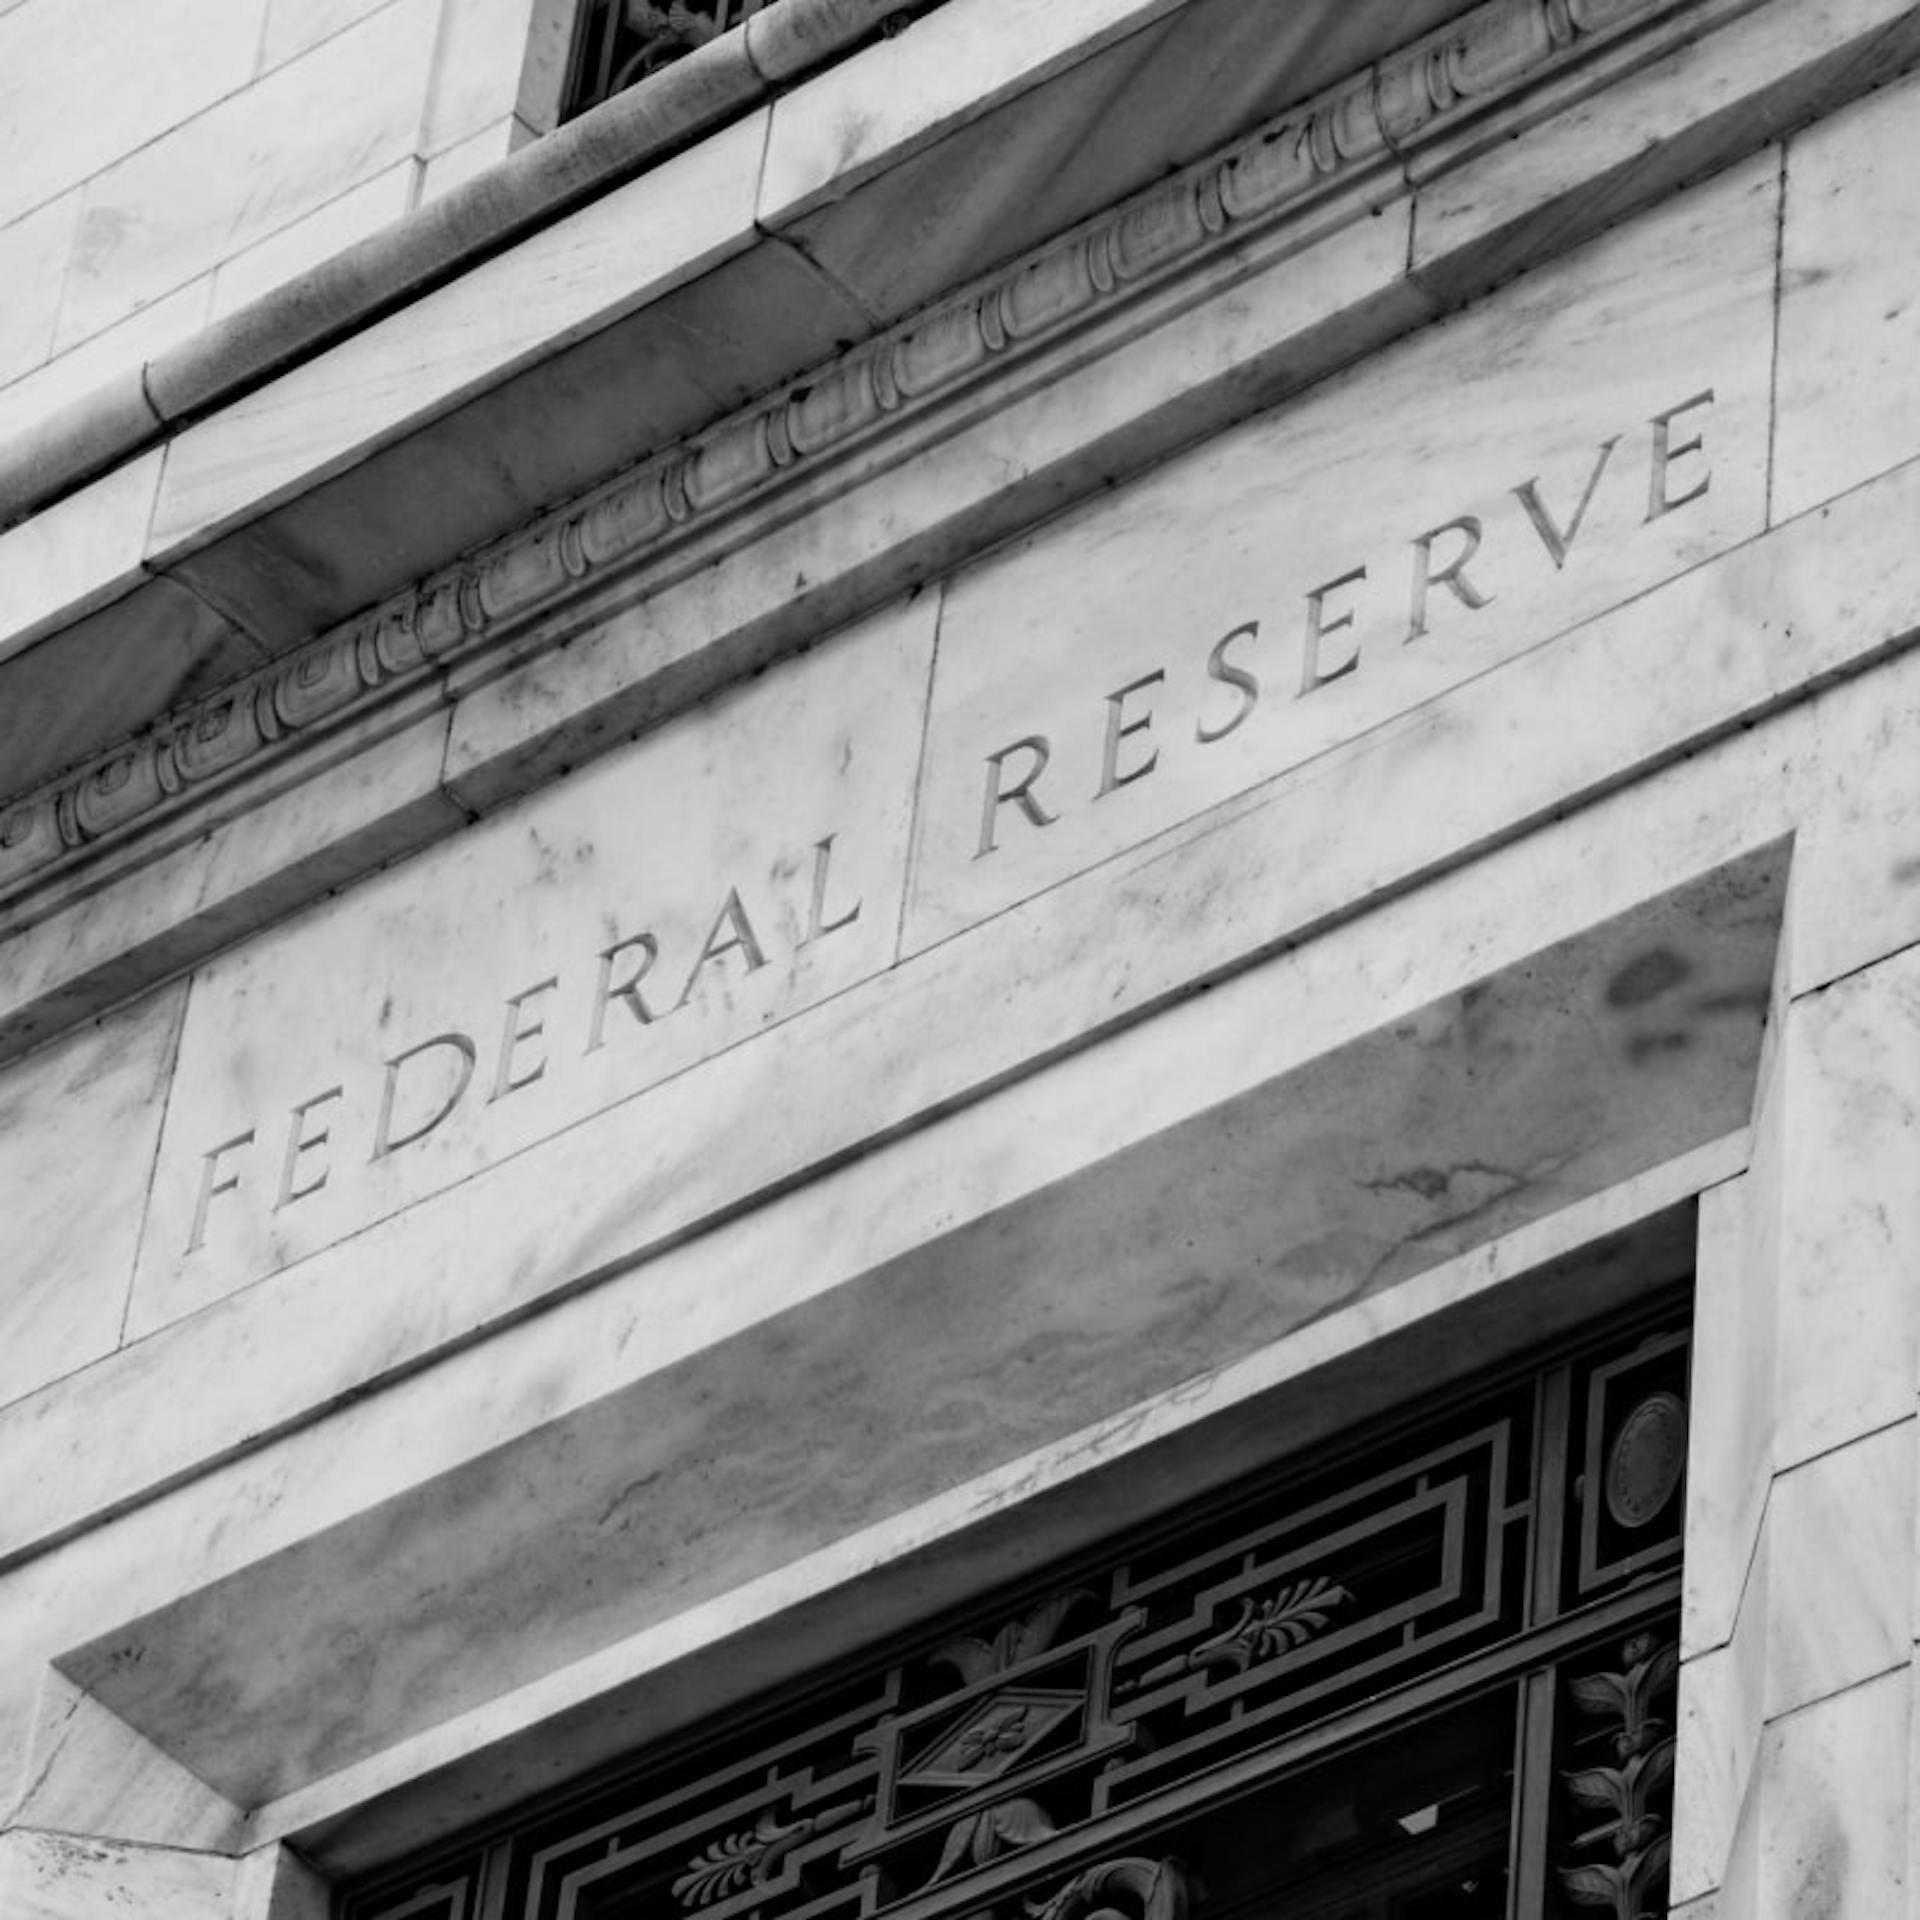 The Federal Reserve is the center of several conspiracy theories.